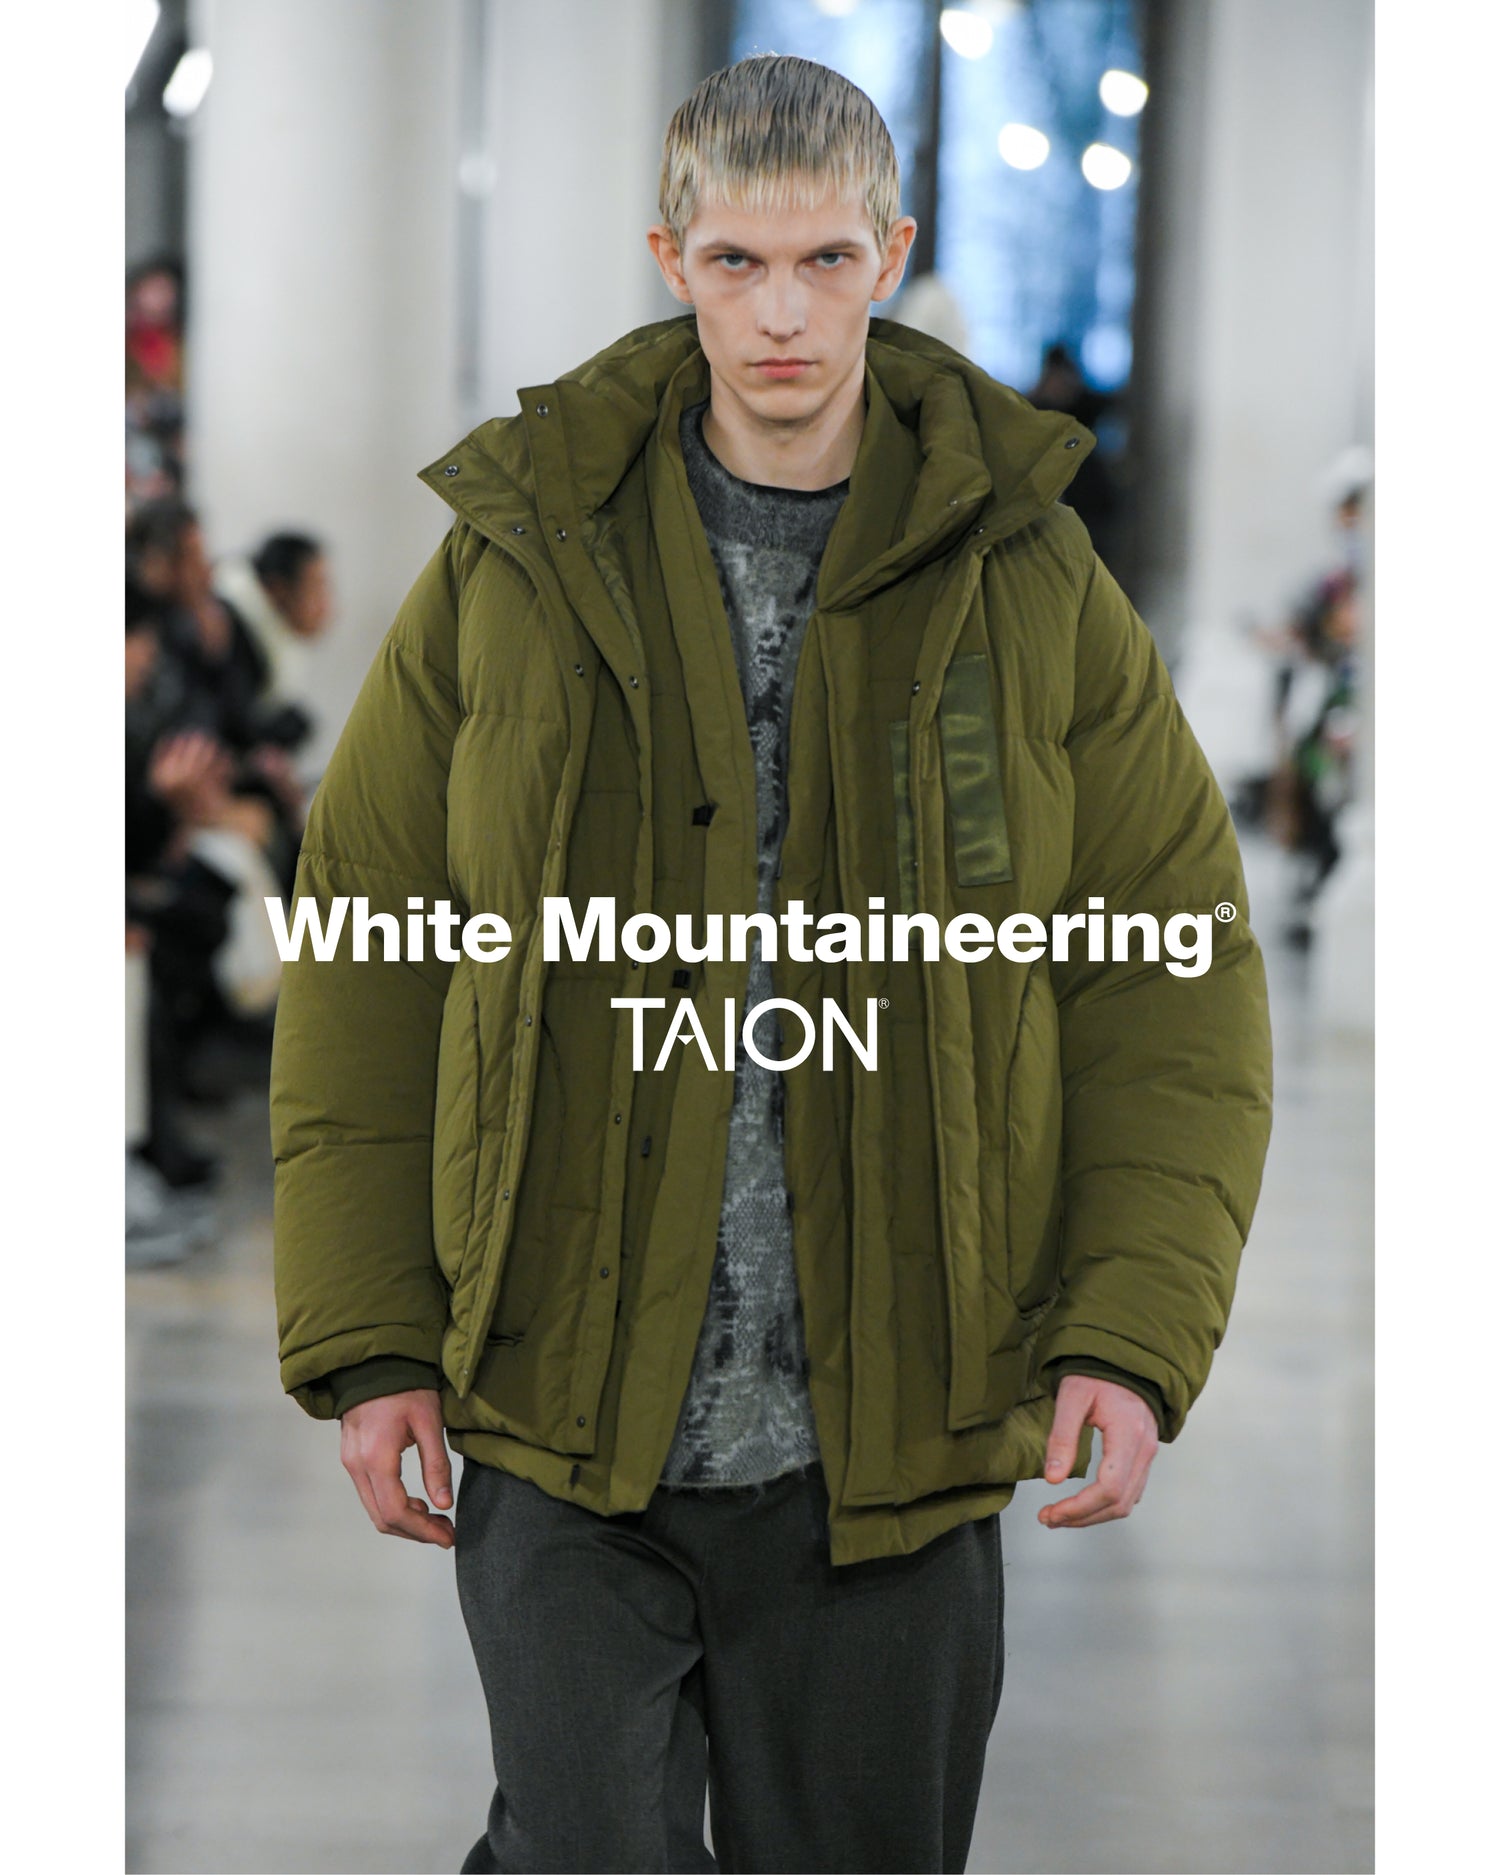 White Mountaineering × TAION – White Mountaineering OFFICIAL 